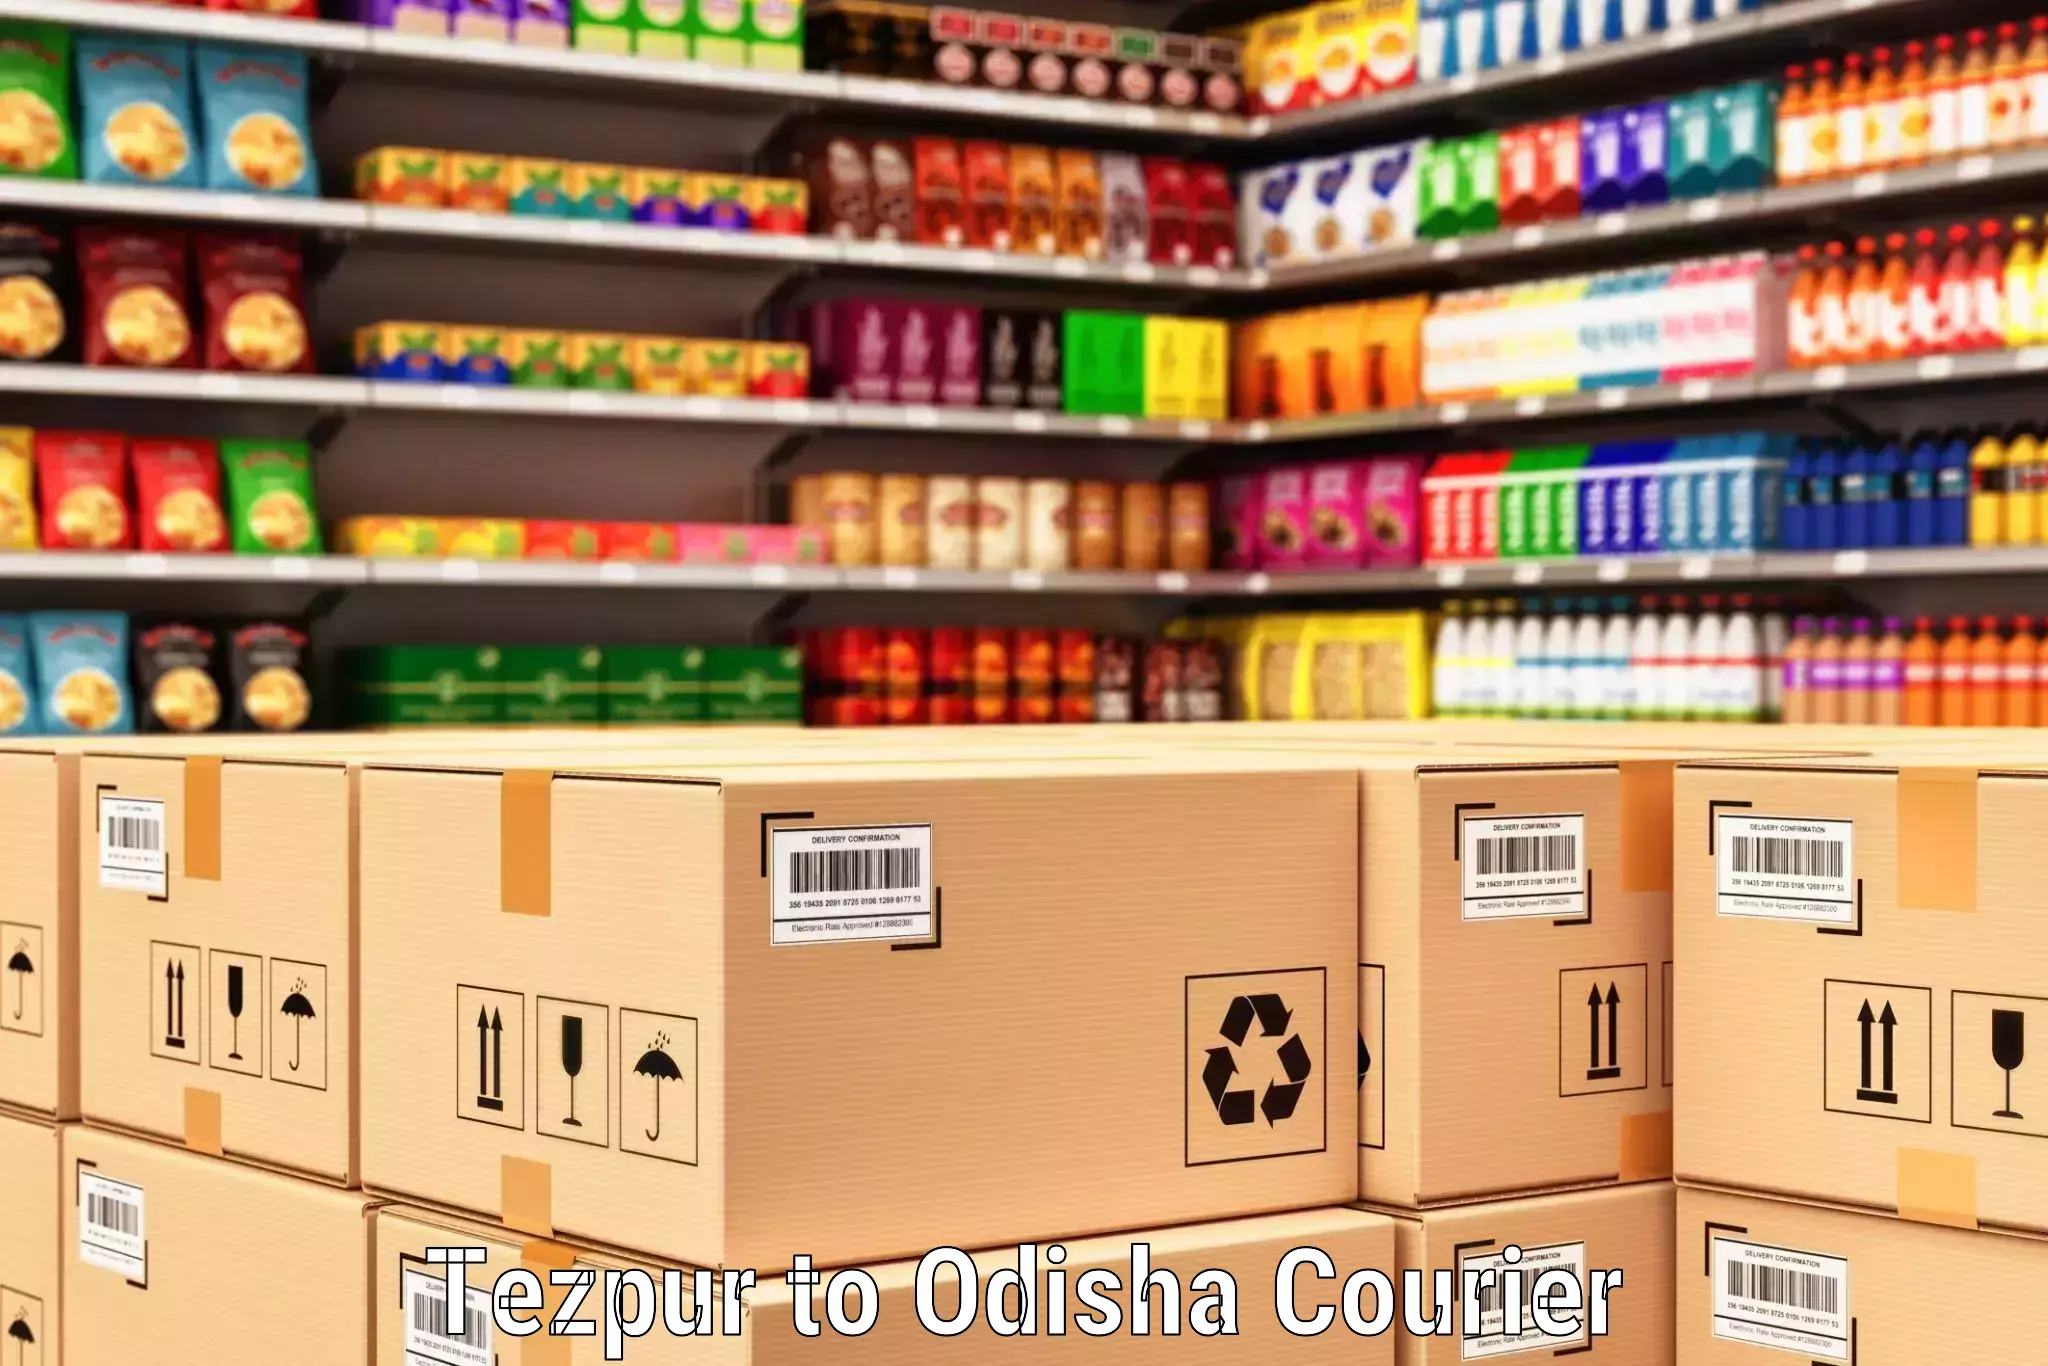 Reliable shipping partners Tezpur to Loisingha